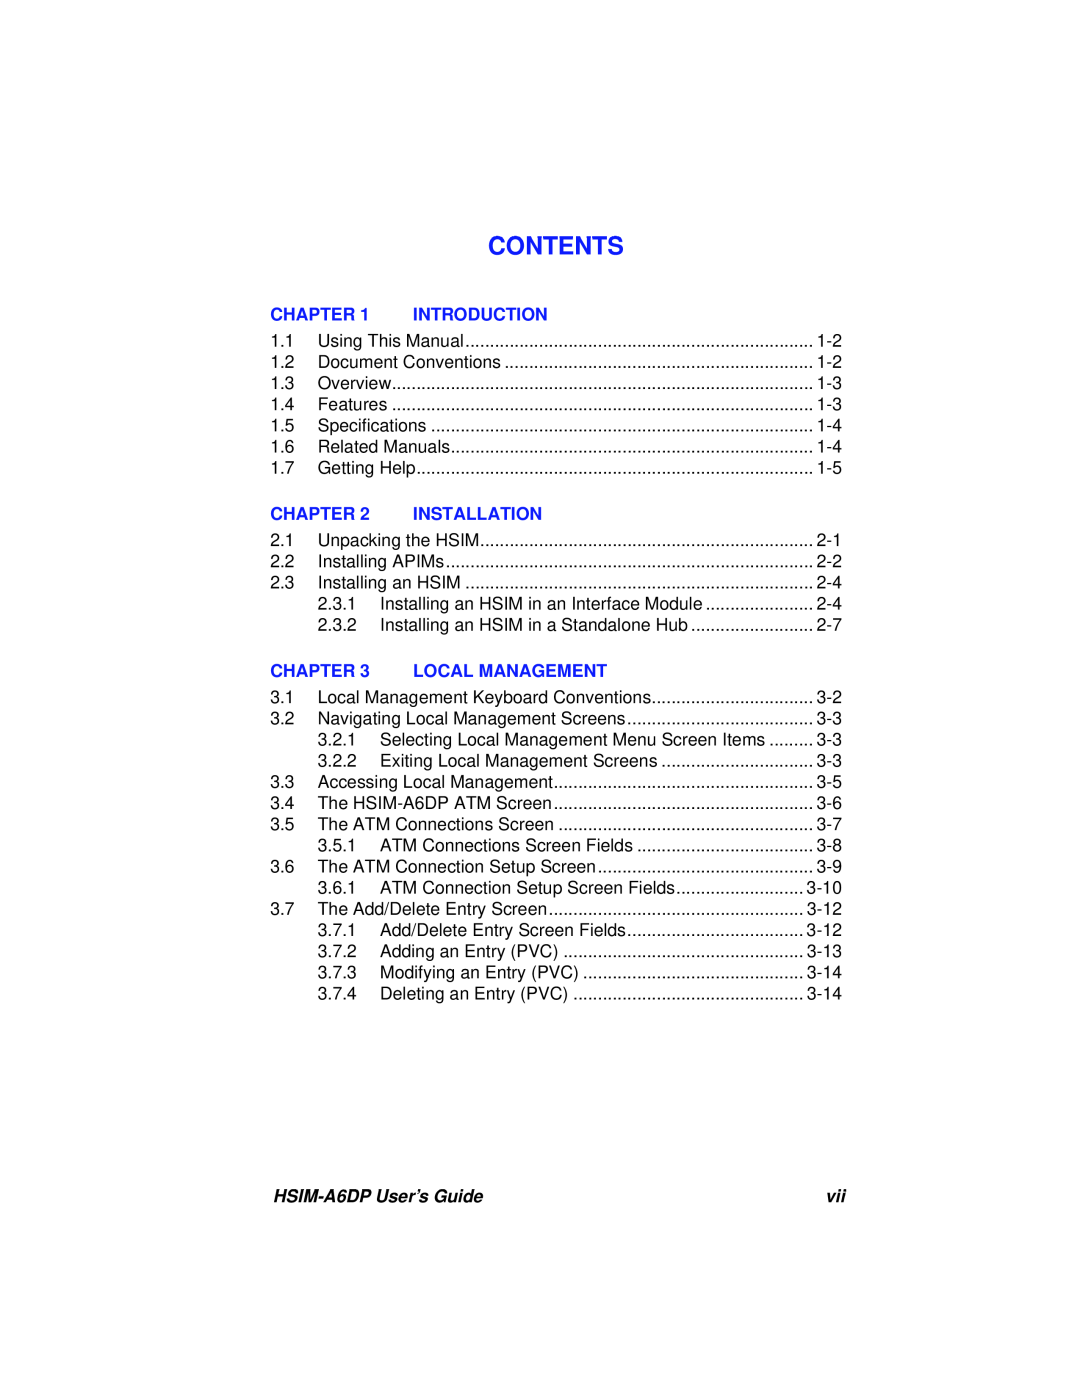 Cabletron Systems manual Contents, Chapter, Introduction, Installation, Local Management, HSIM-A6DP User’s Guide 